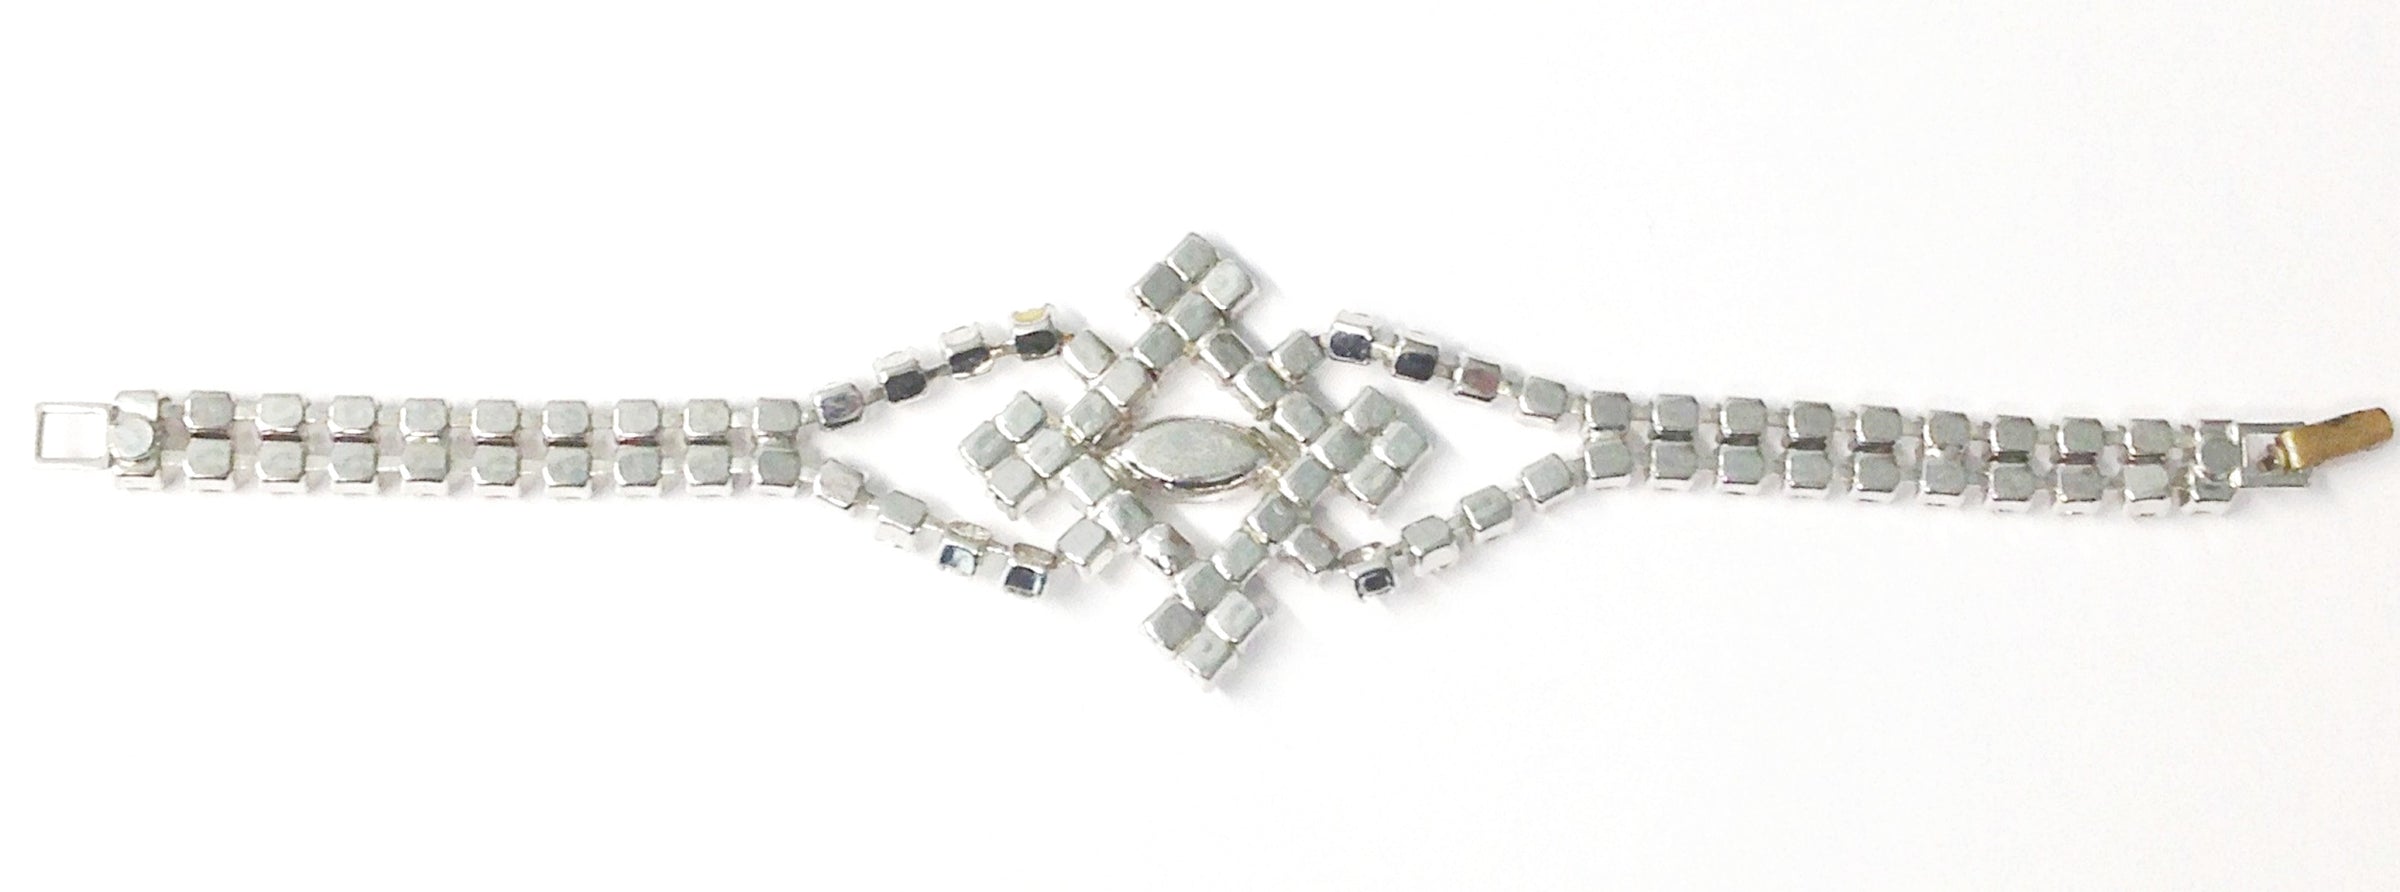 Vintage 1940's-1950's Silver Tone Clear Rhinestone Bracelet - Hers and His Treasures